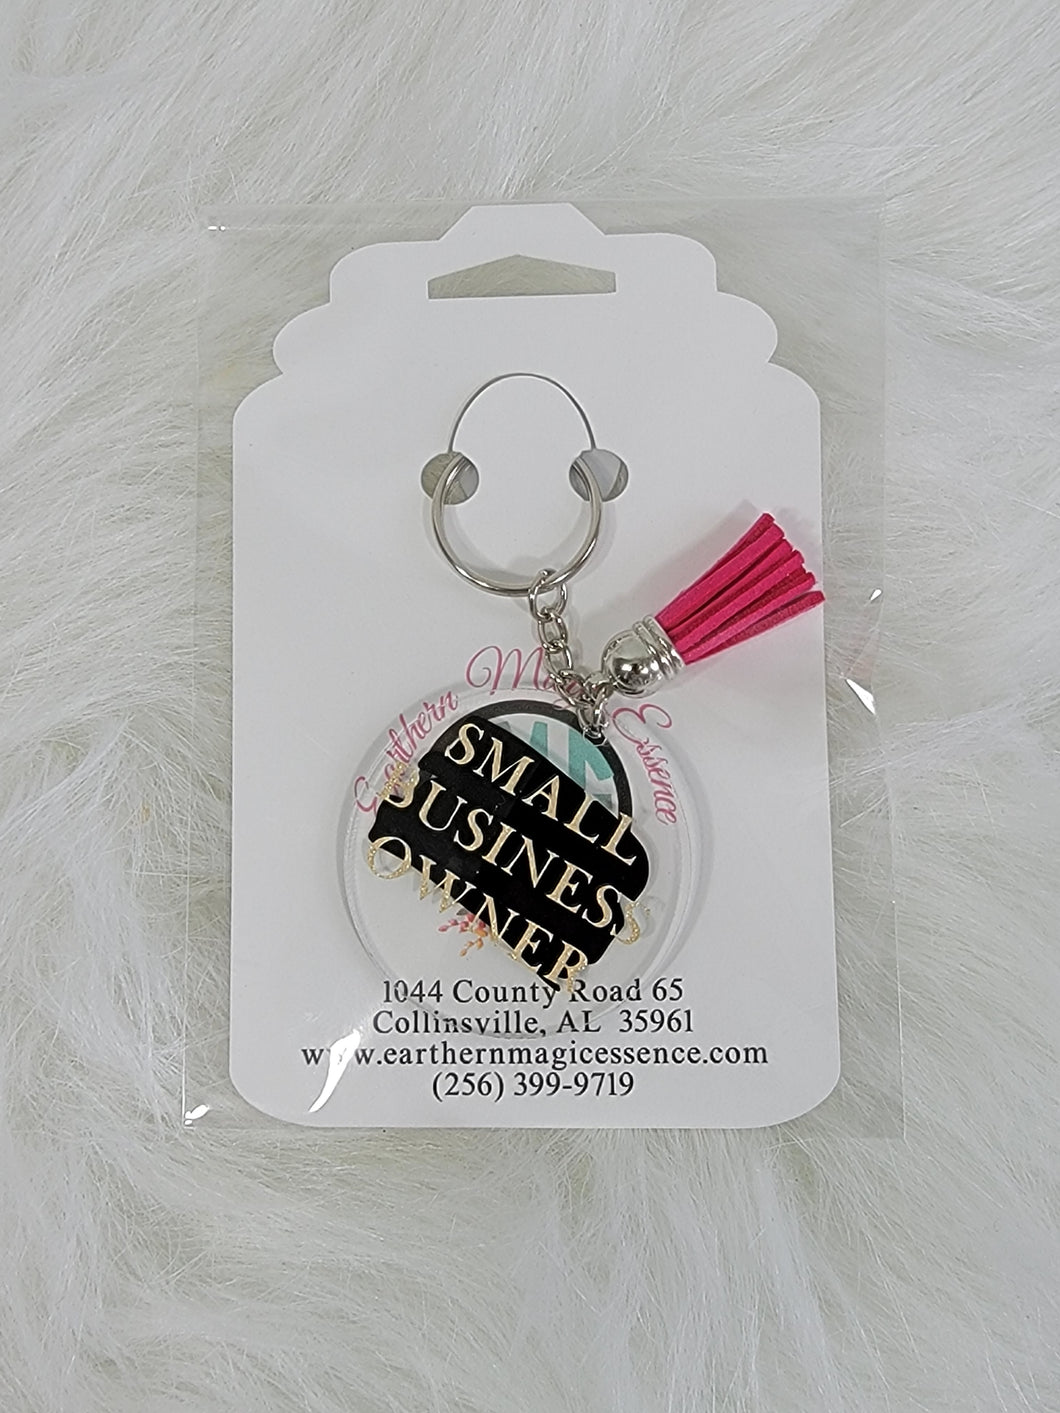 Round Acrylic Keychain - Small Business Owner